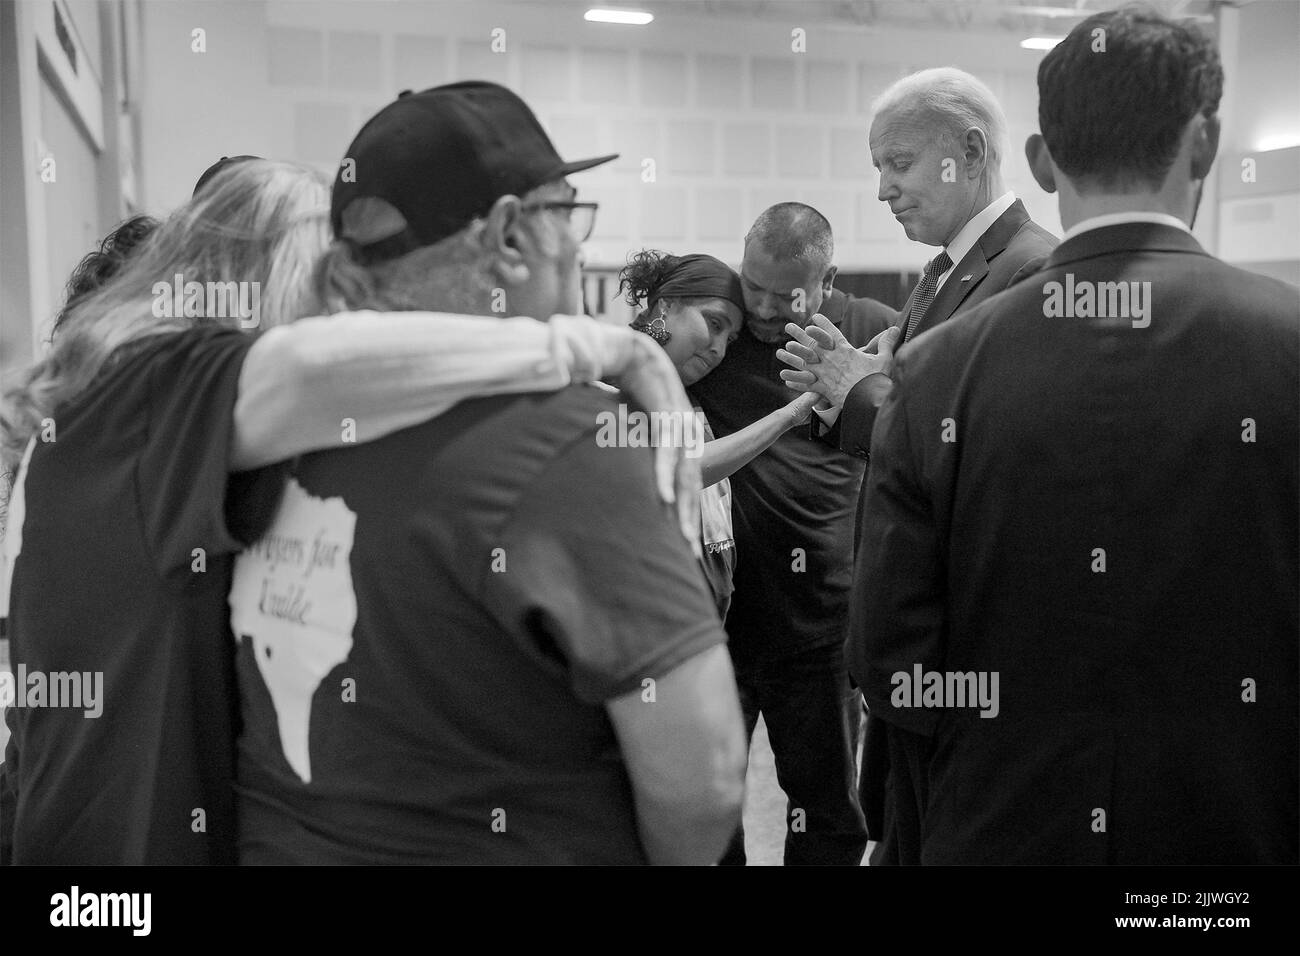 Uvalde, United States of America. 29 May, 2022. U.S President Joe Biden meets with family members of the victims of the mass shooting at Robb Elementary School, May 29, 2022 in Uvalde, Texas. The school is the site where a gunman slaughtered 19 students and two teachers with a military style assault rifle.  Credit: Adam Schultz/White House Photo/Alamy Live News Stock Photo